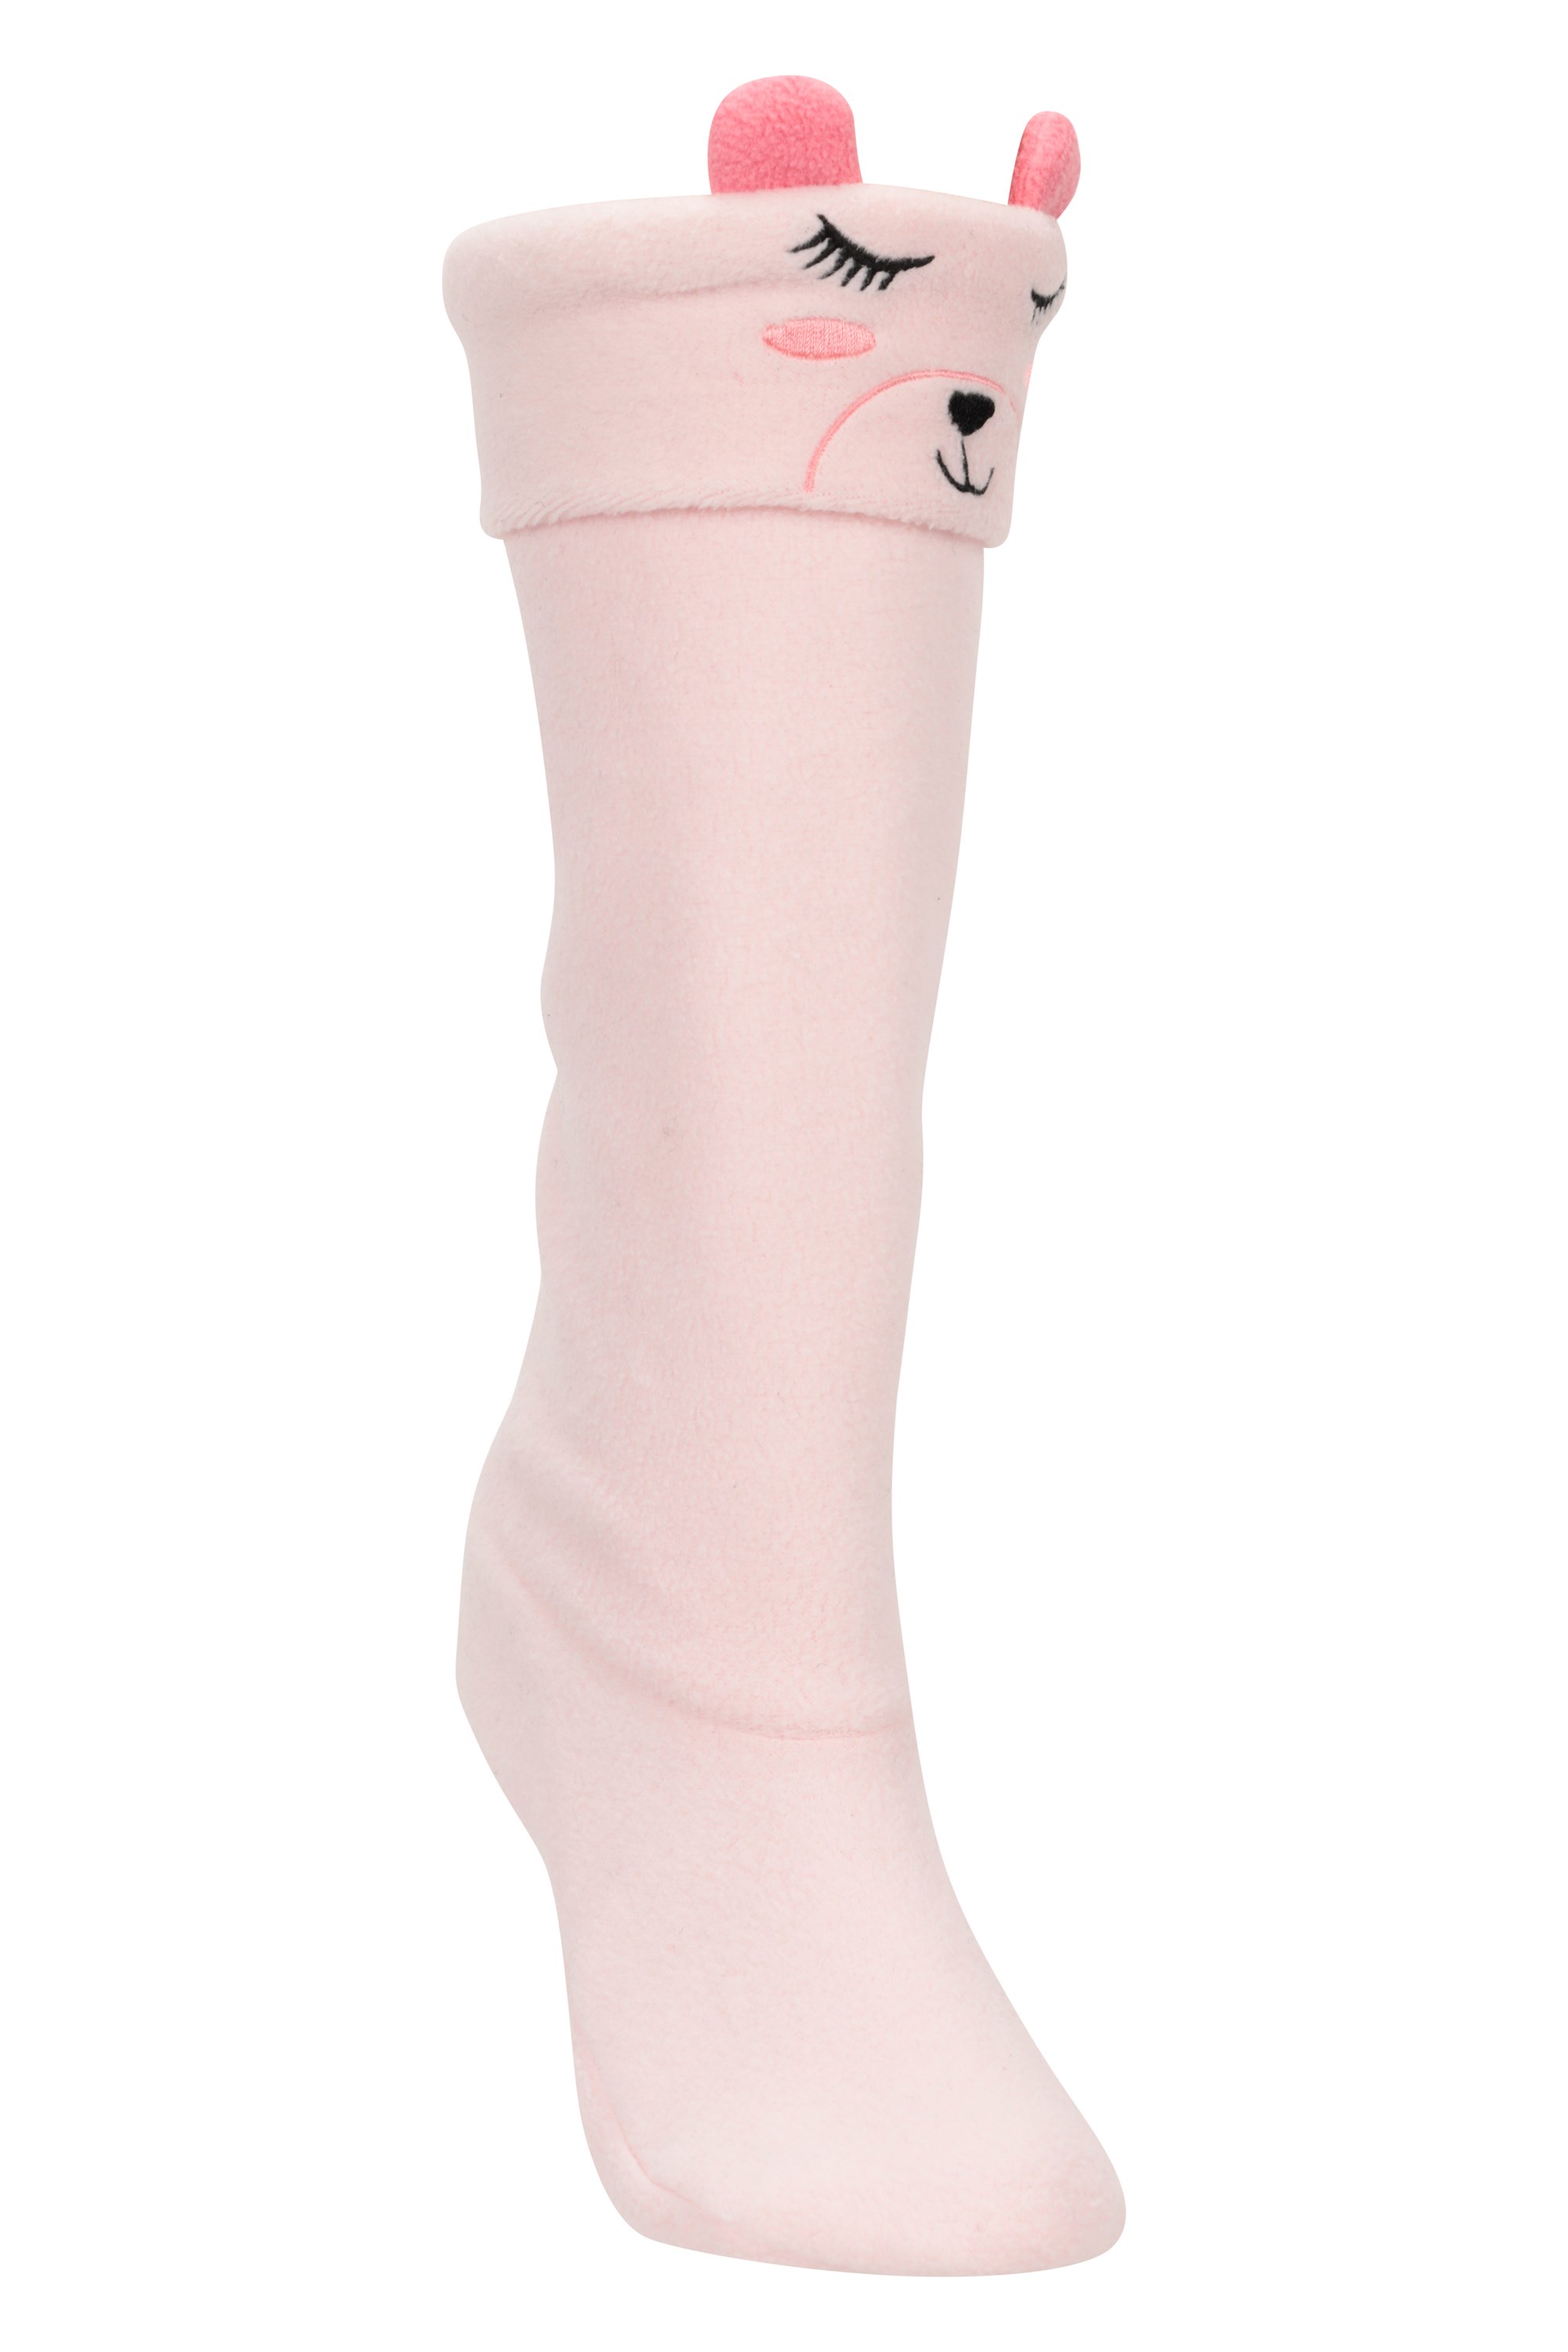 Kids Animal Welly Liners - Pink